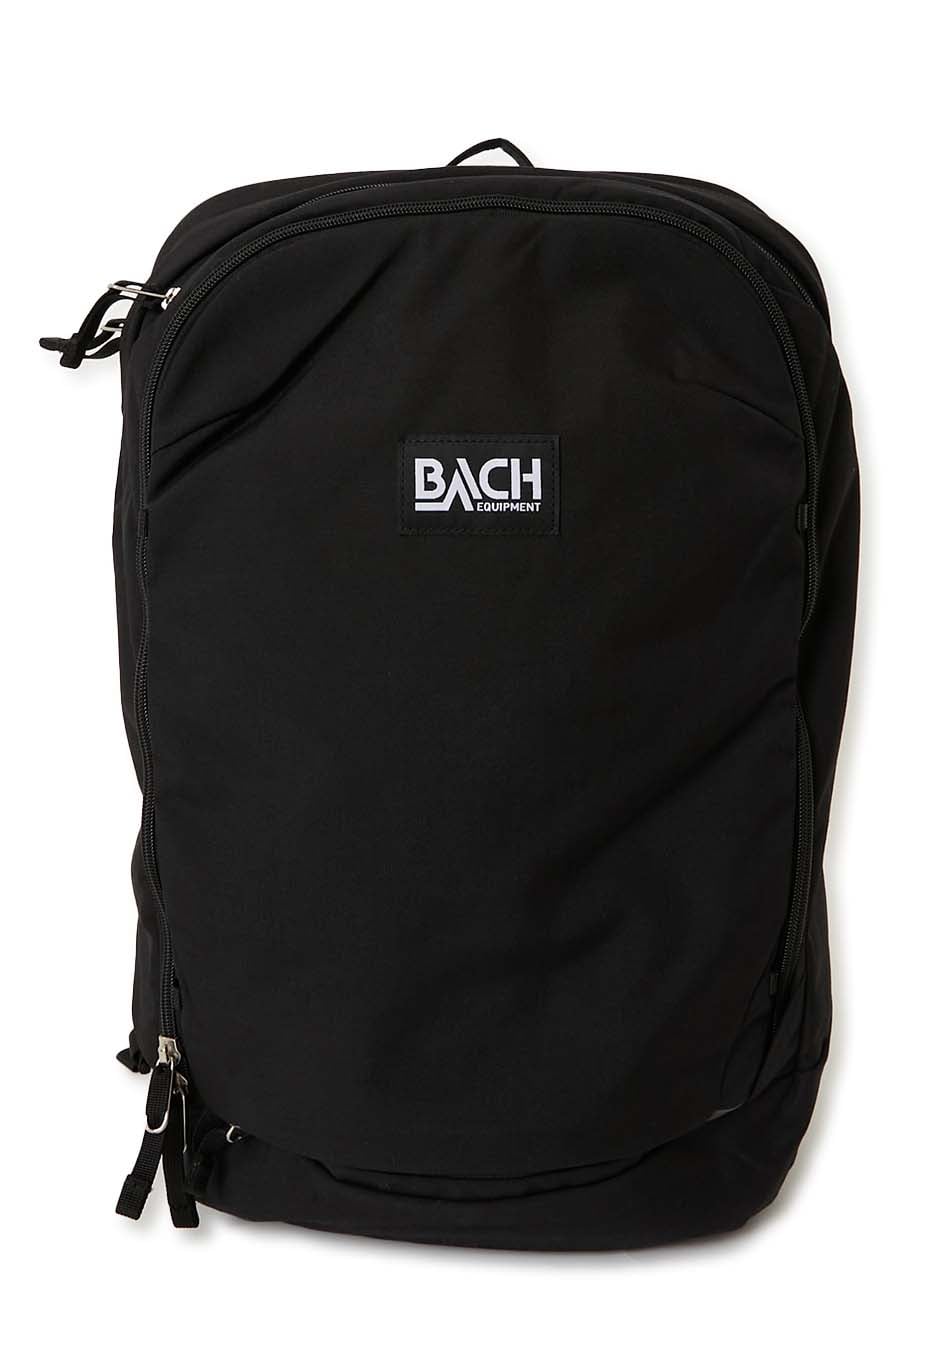 BACH /UNDERCOVER 26 bag pack